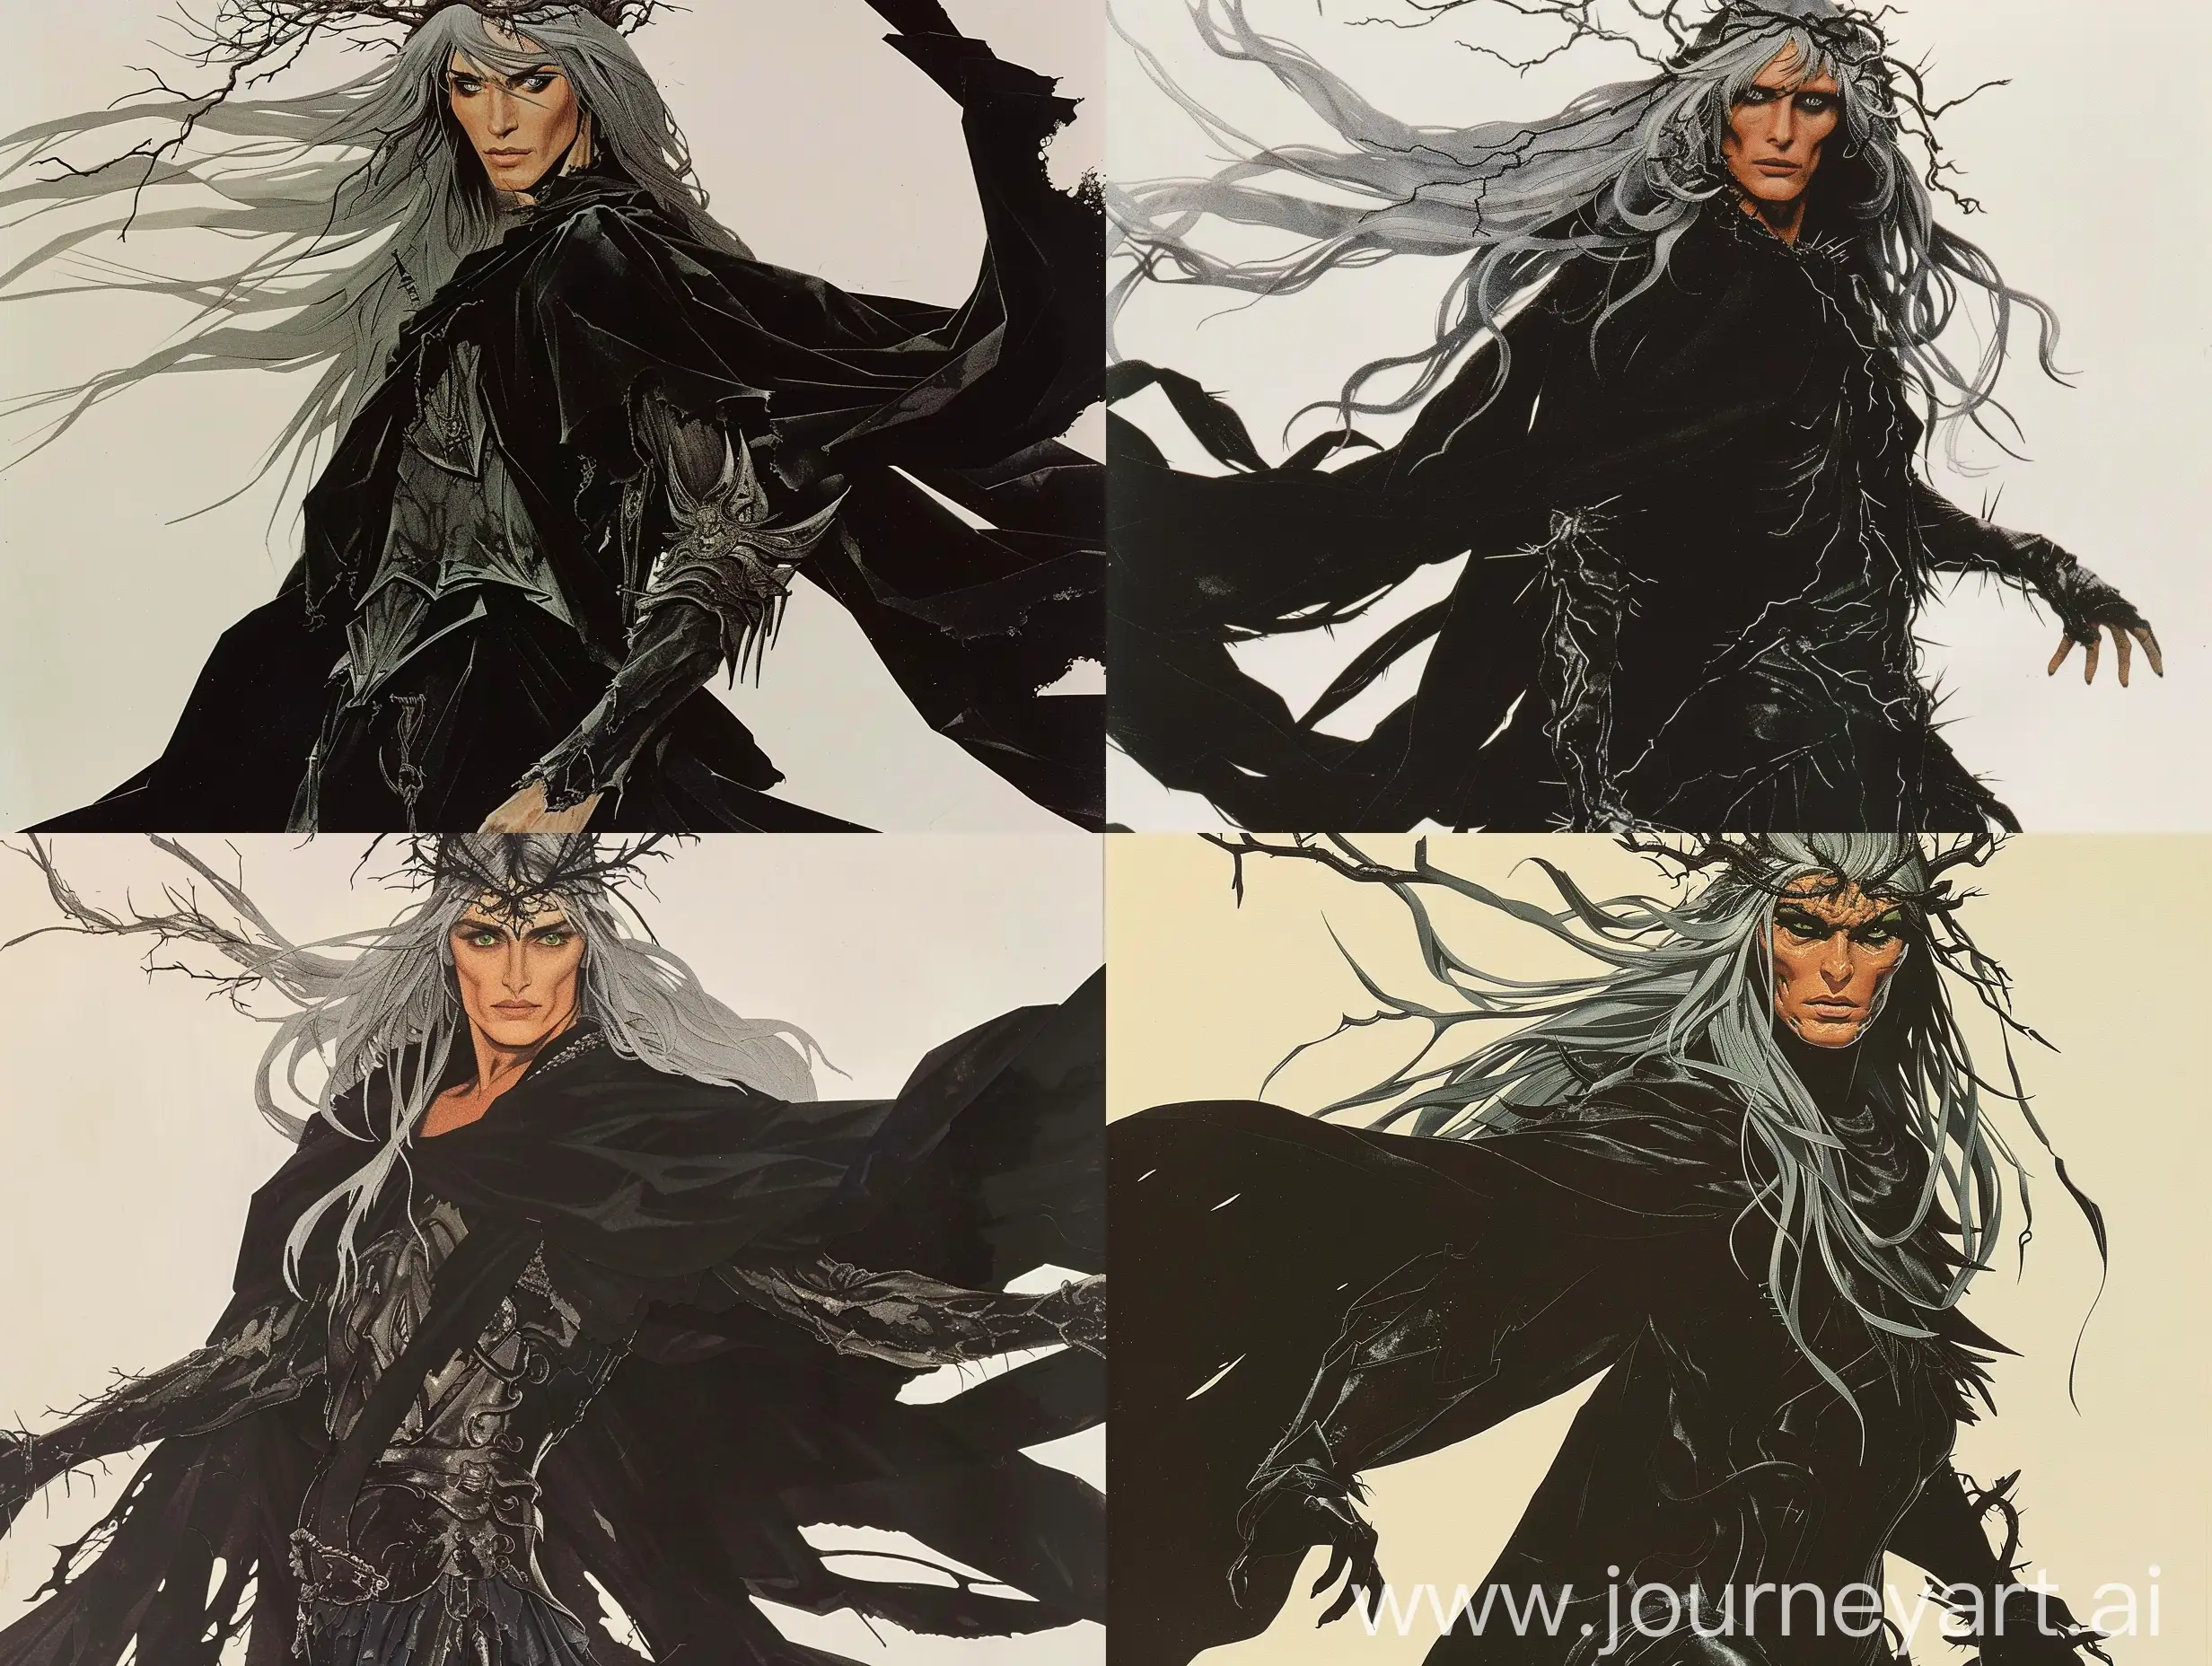 Sinister-Queen-of-Shadows-Dark-Fantasy-Paper-Art-with-Imposing-Figure-and-Supernatural-Elements